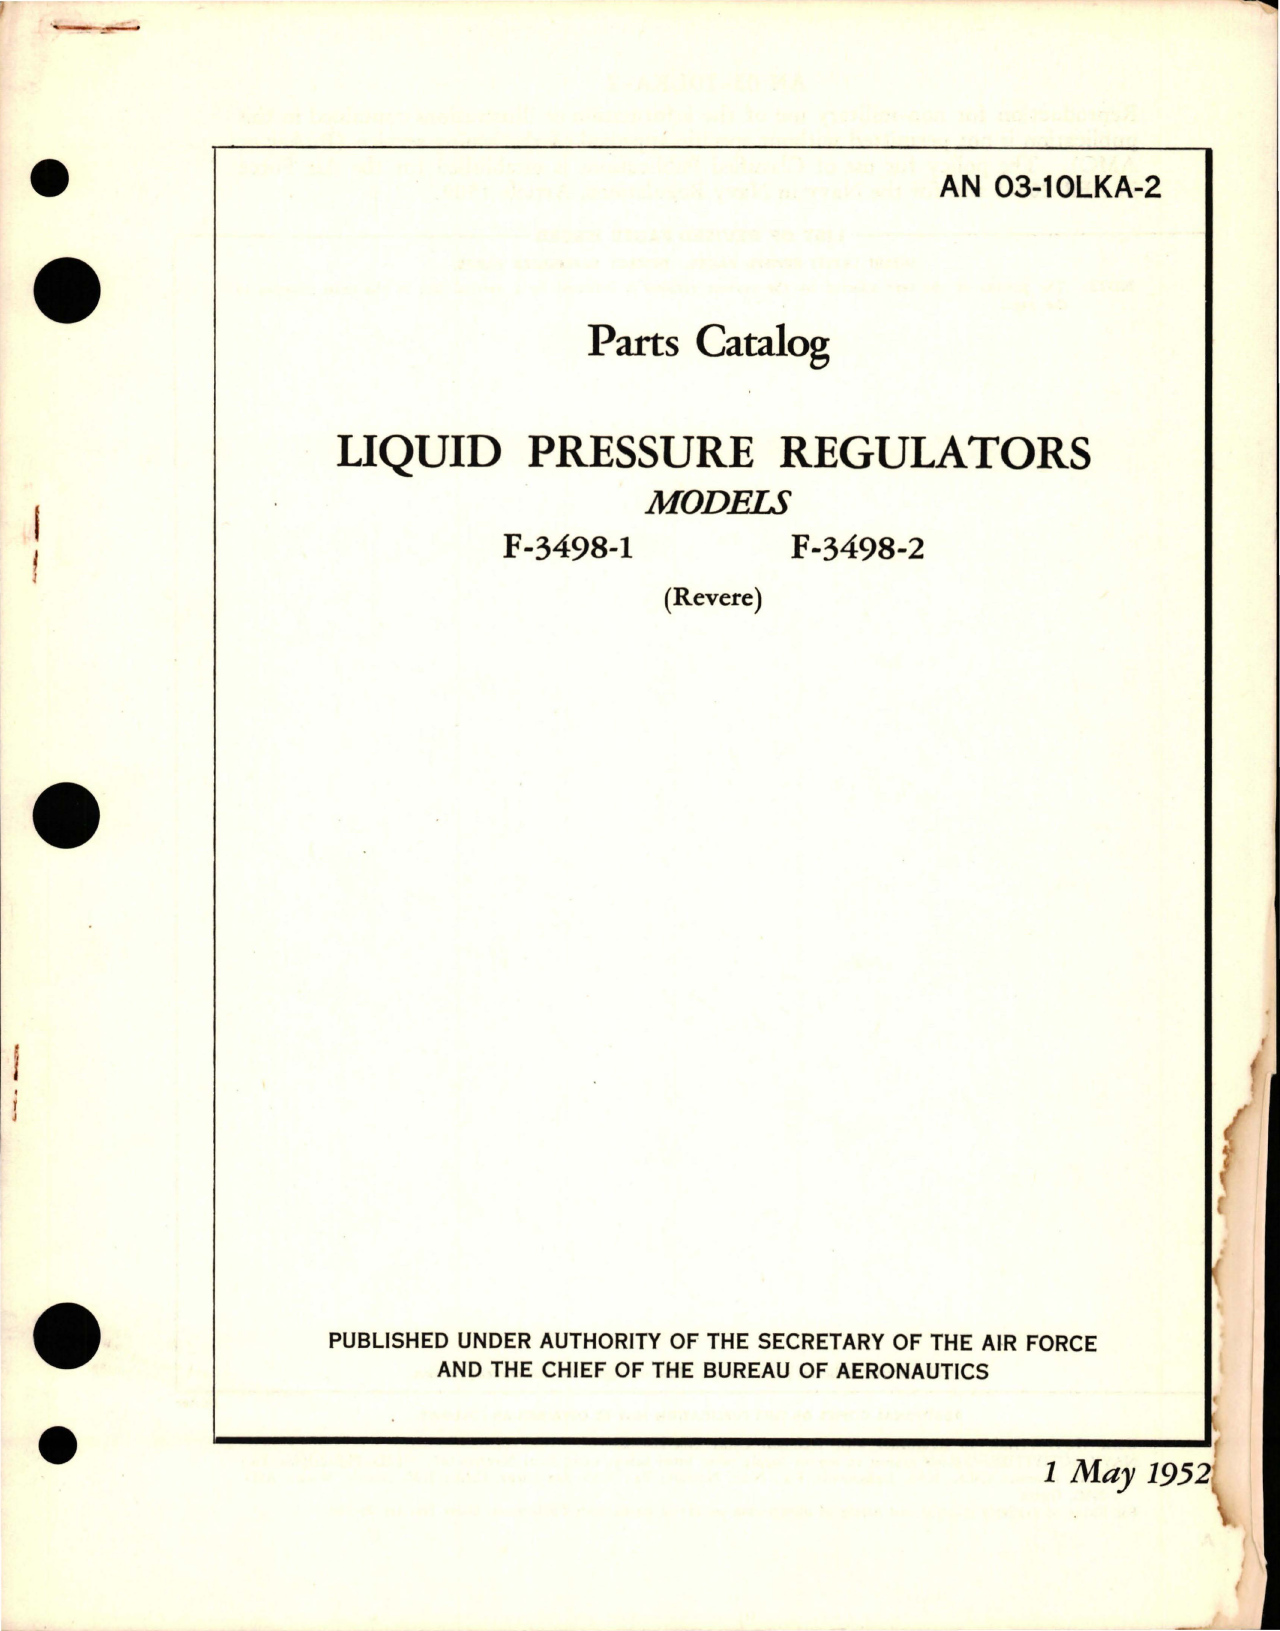 Sample page 1 from AirCorps Library document: Parts Catalog for Liquid Pressure Regulators - Models F-3498-1 and F-3498-2